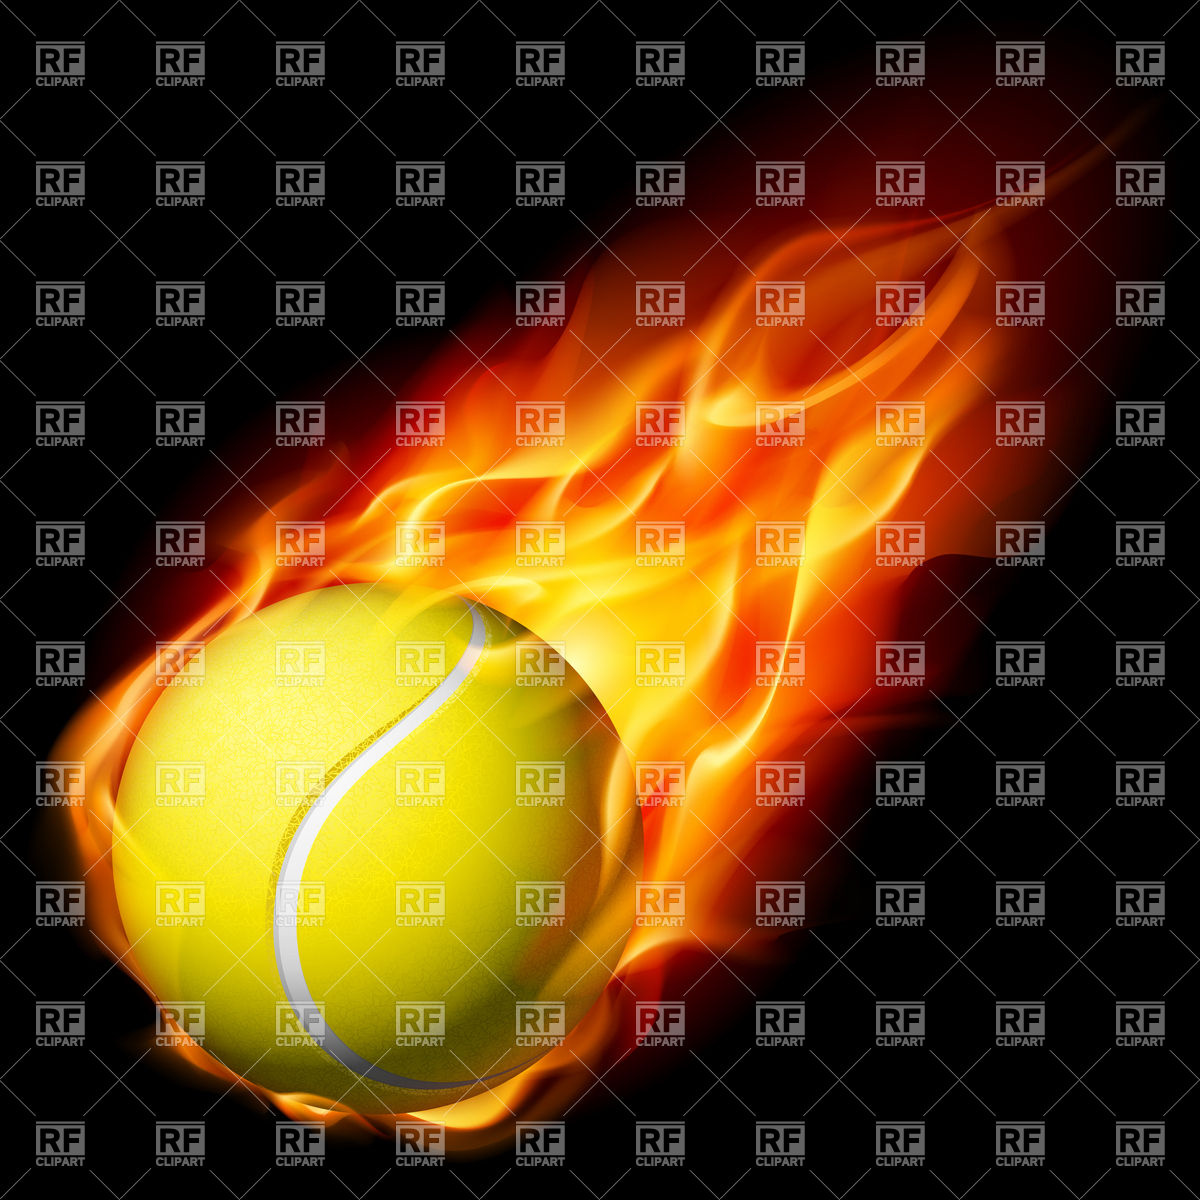 Flaming Basketball Pics Images   Crazy Gallery